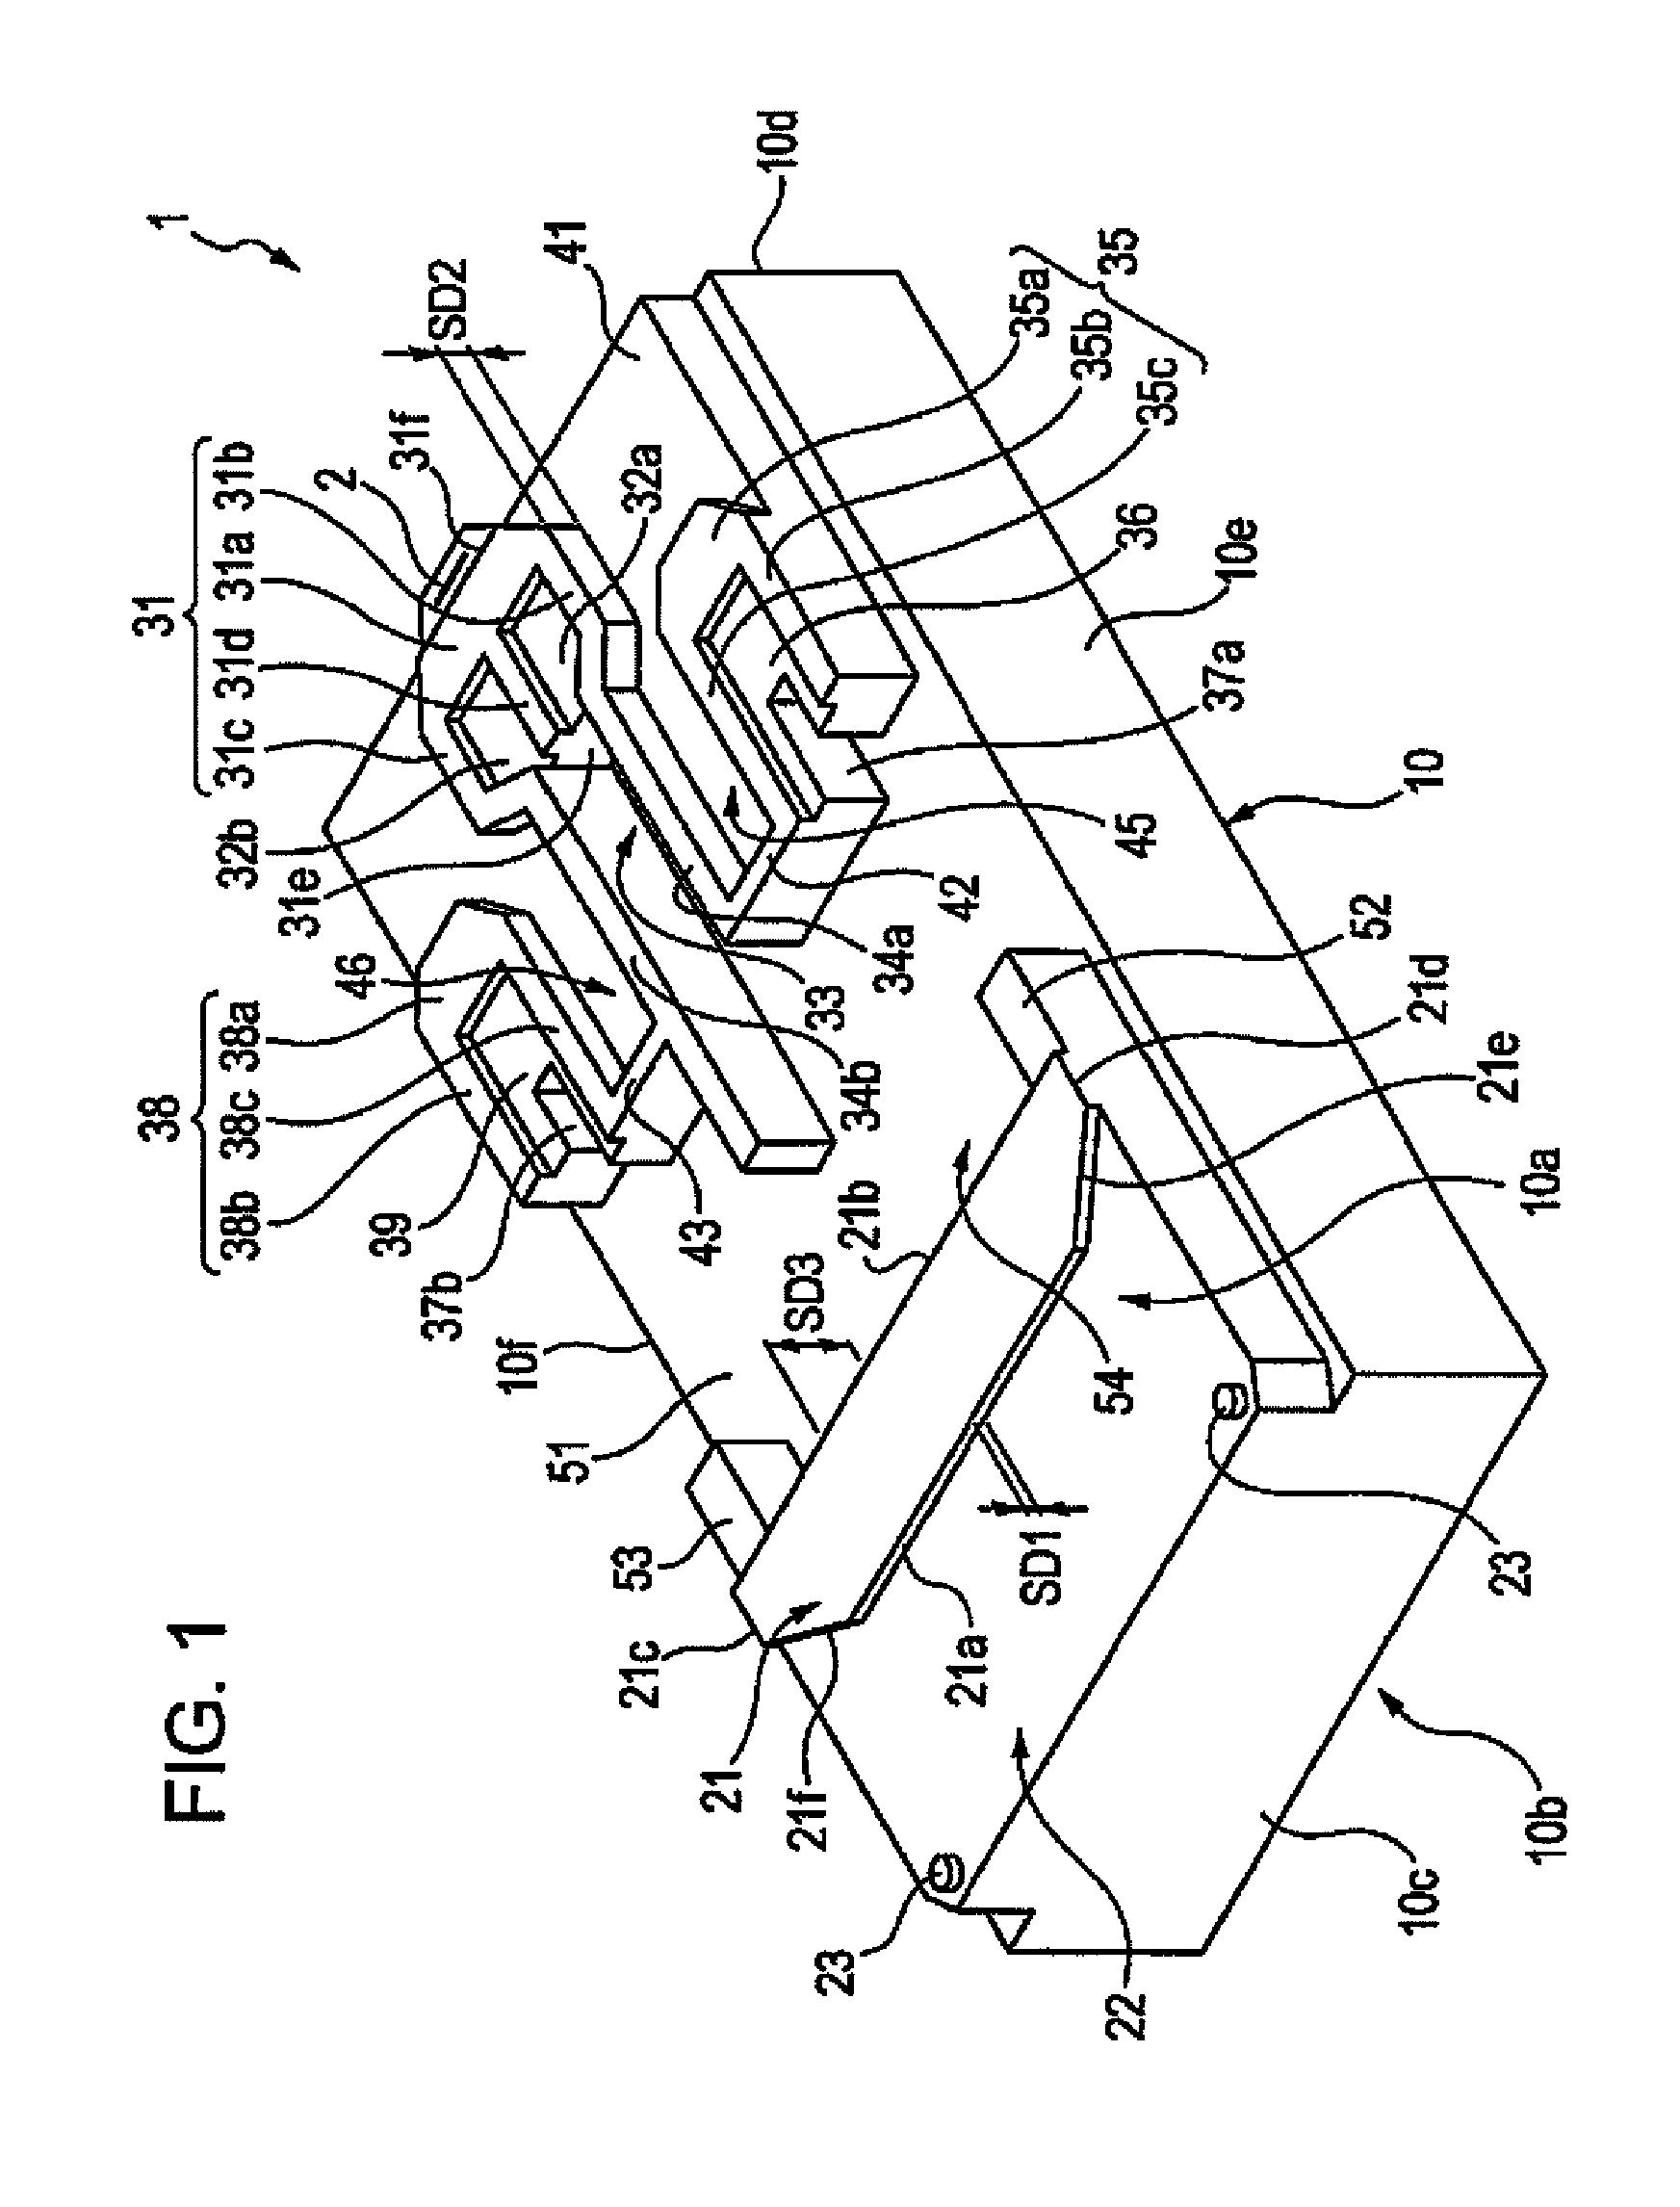 Magnetic head device having rear positive pressure surface and rear side positive pressure surface